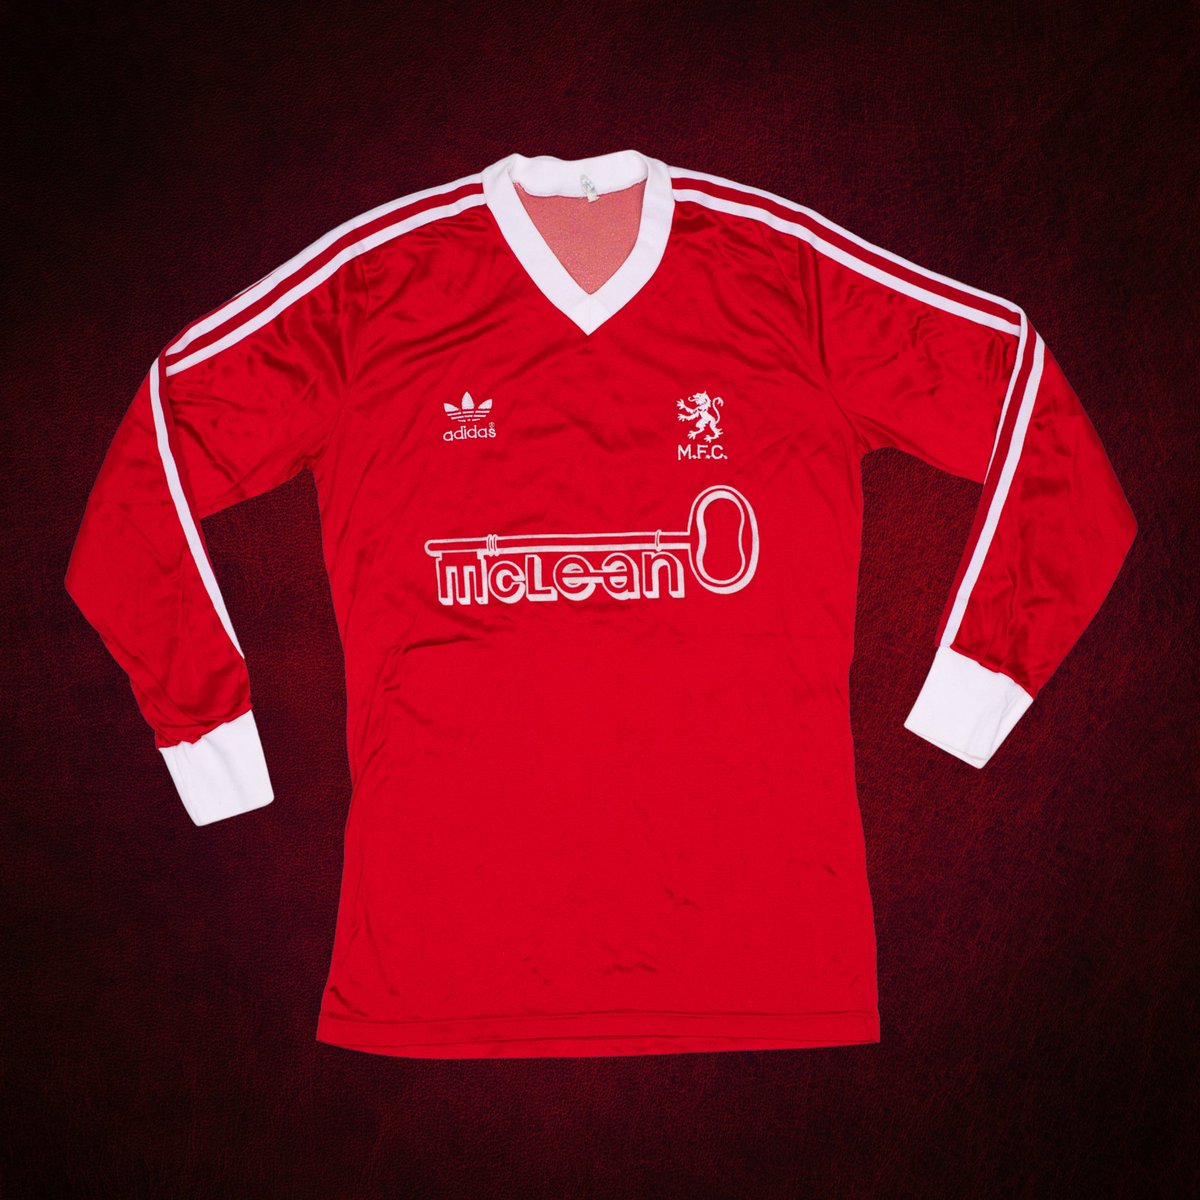 🚨 | We have one of these fabulous shirts available for purchase; An exceptionally rare, 100% original, long sleeve 82/83 home shirt, complete with ‘McLean’ (with key) sponsor. If you have a genuine interest in adding this to your collection, please drop us a DM. Thank you.